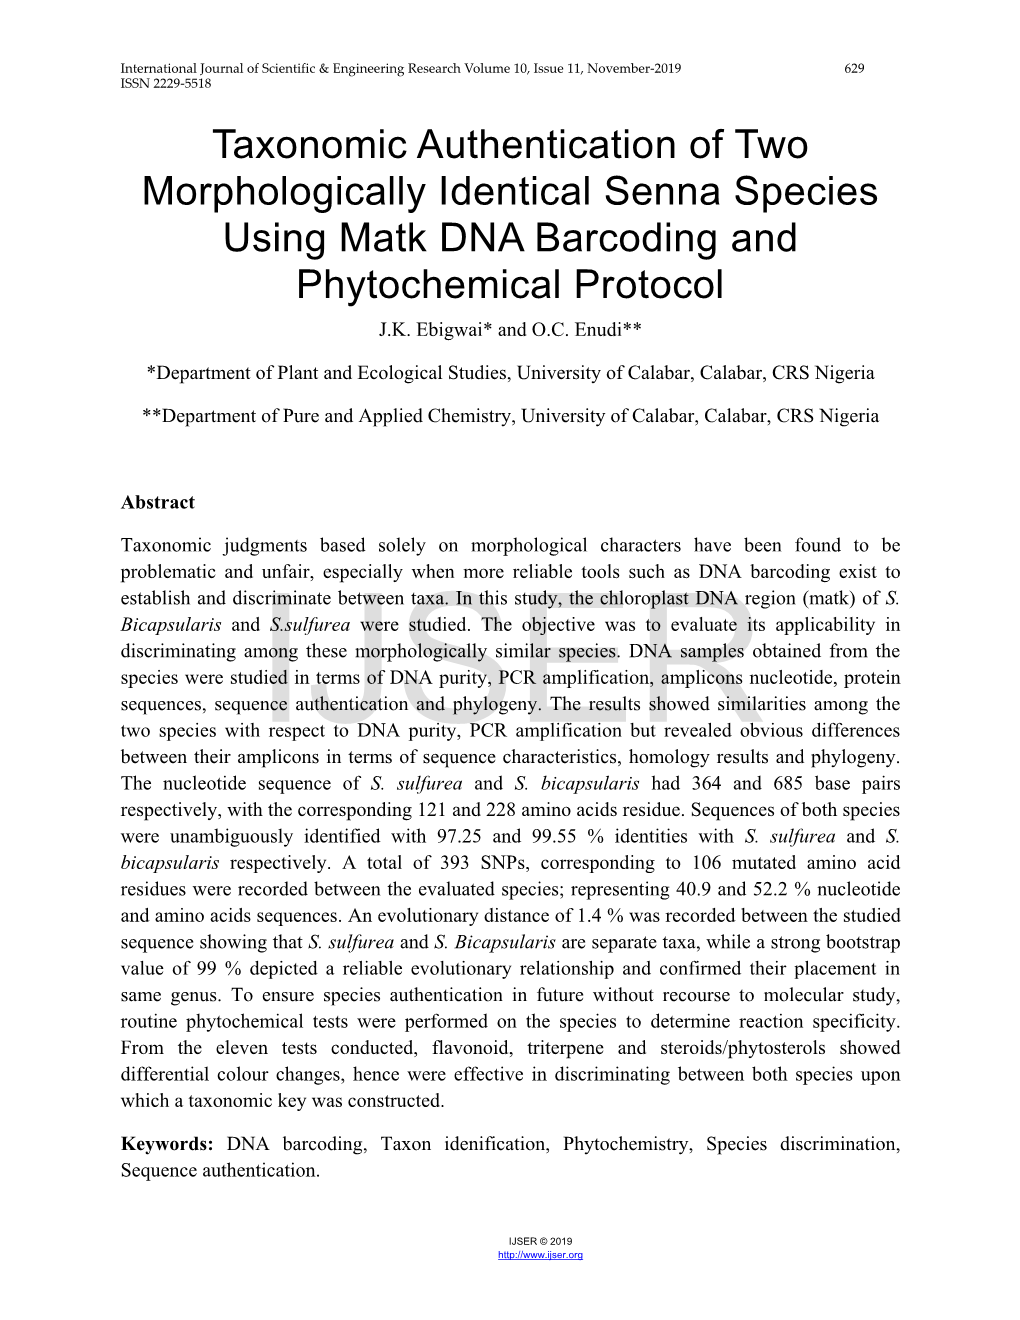 Taxonomic Authentication of Two Morphologically Identical Senna Species Using Matk DNA Barcoding and Phytochemical Protocol J.K